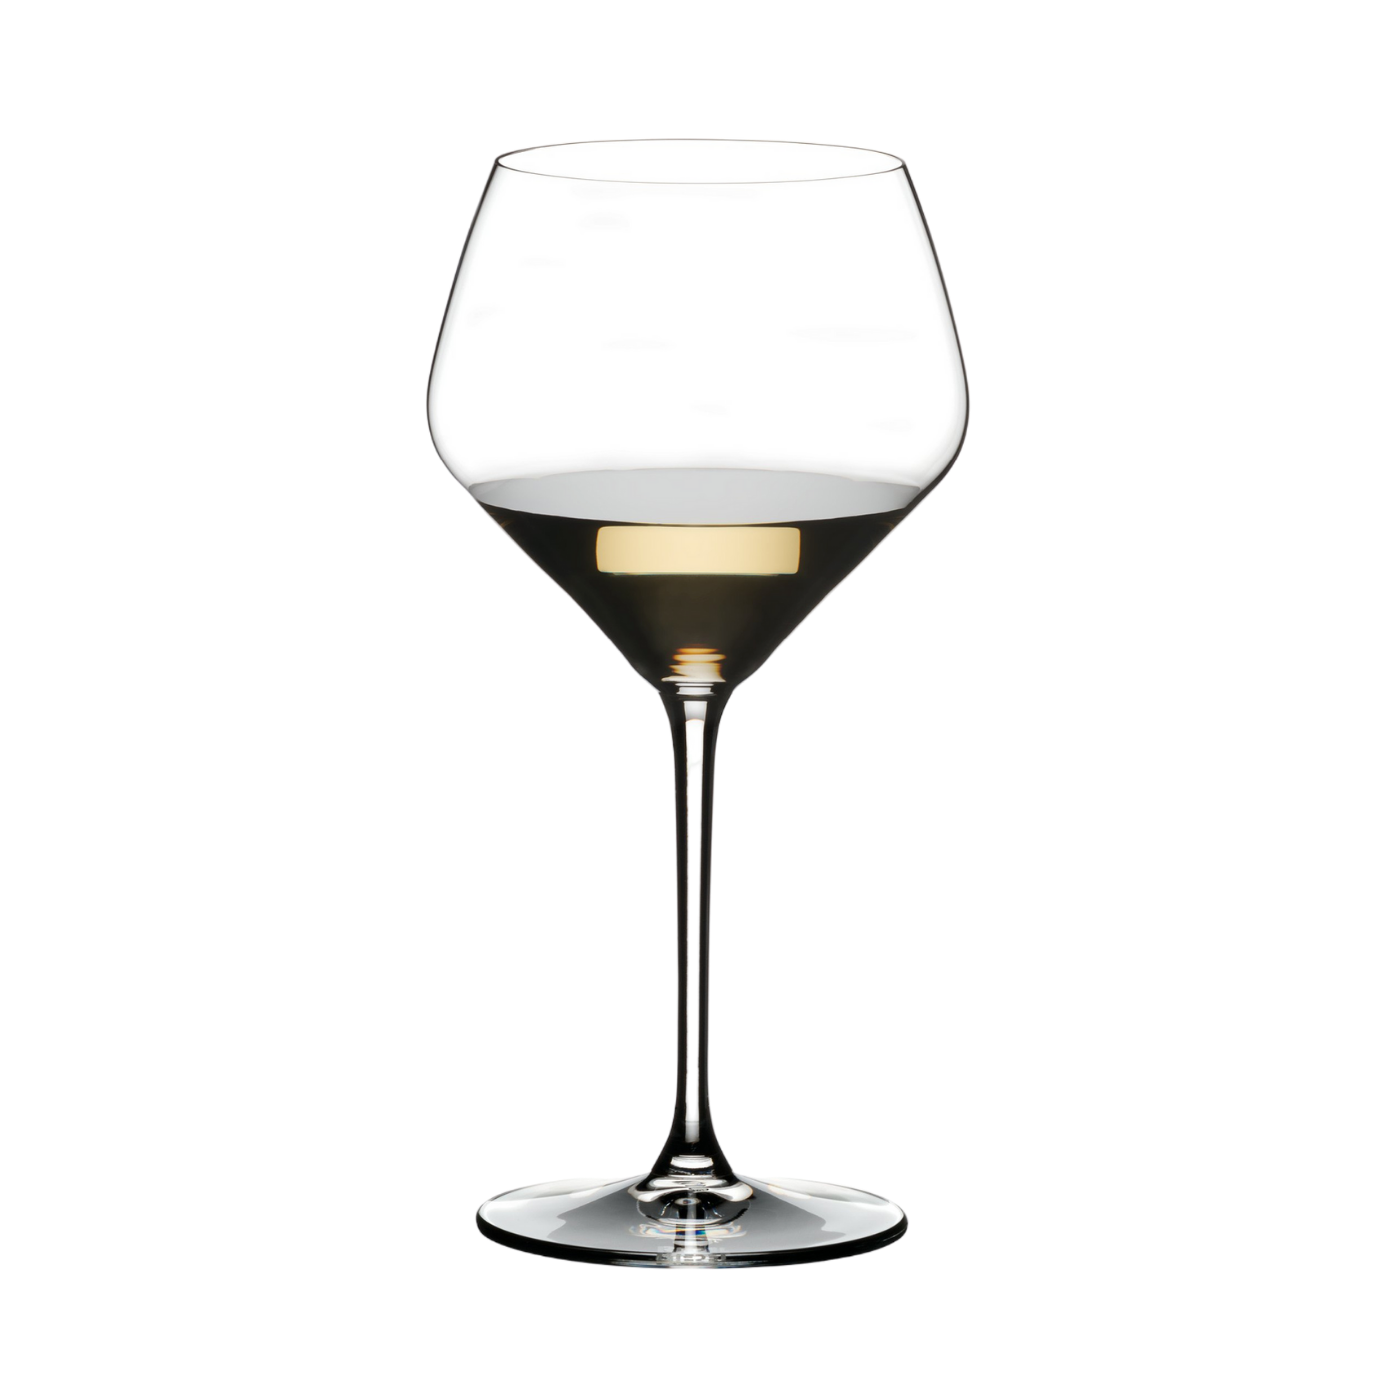 Riedel Extreme Oaked Chardonnay Glasses (set of 2)